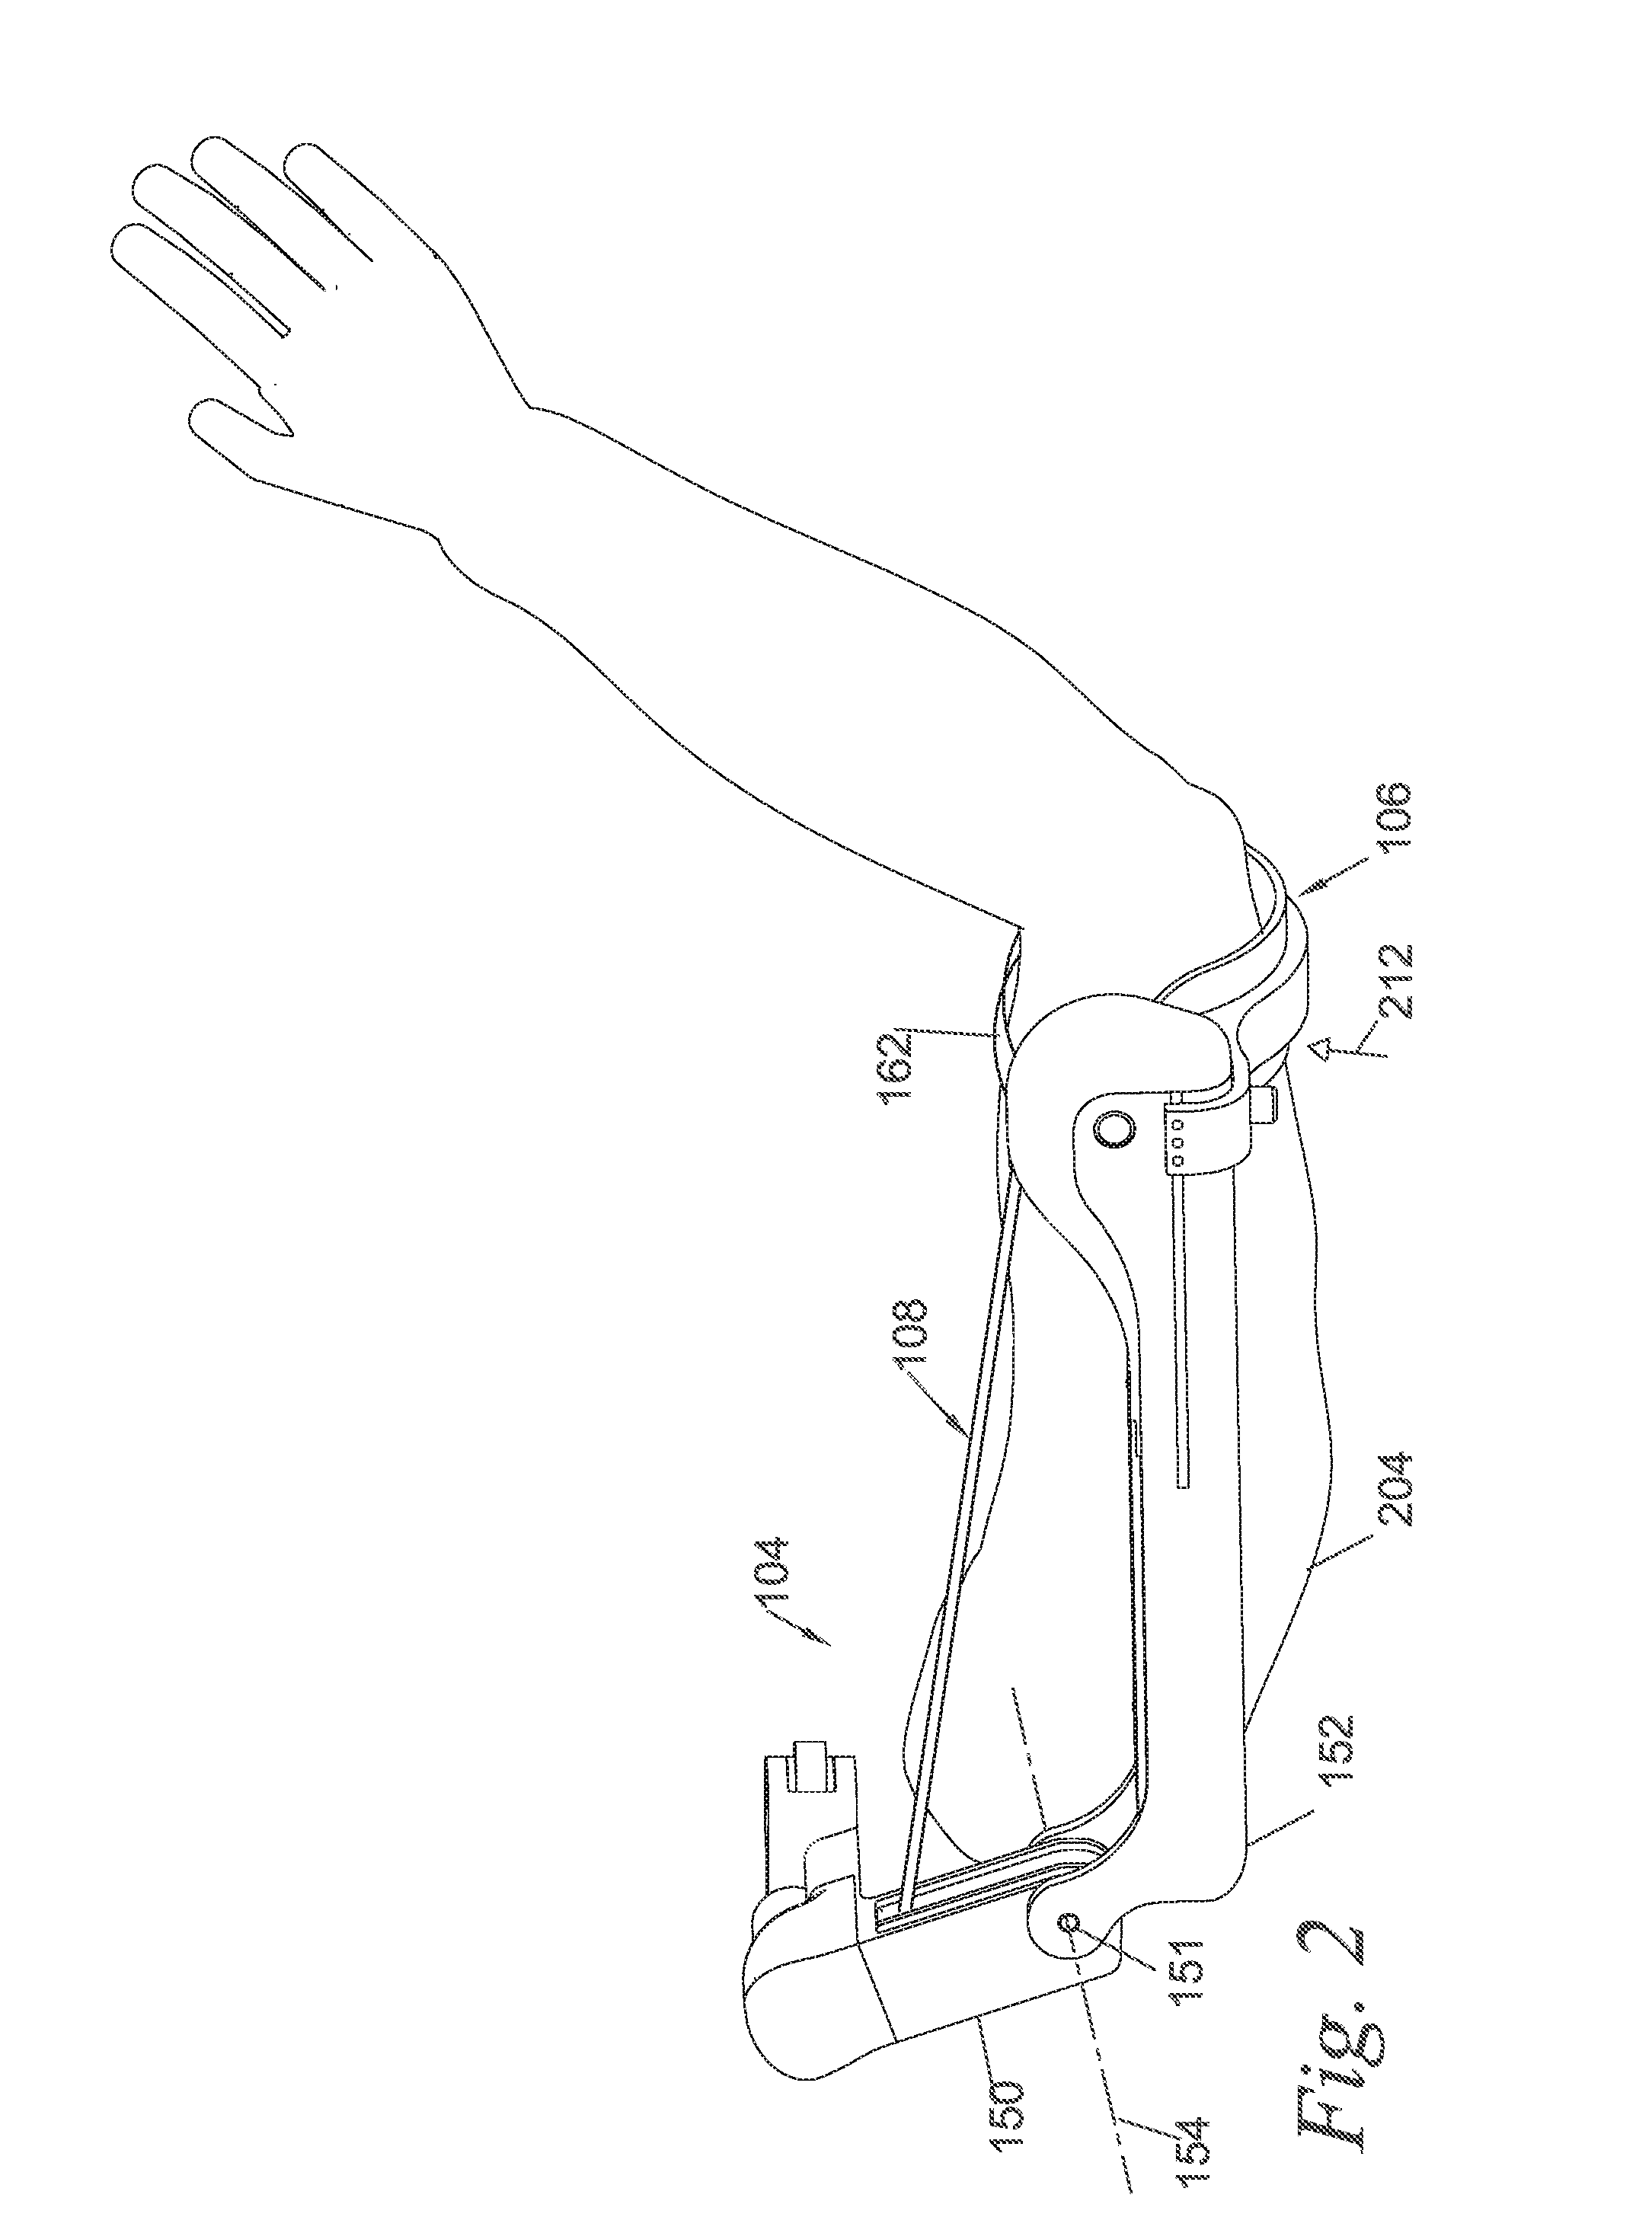 Method and apparatus for human arm supporting exoskeleton